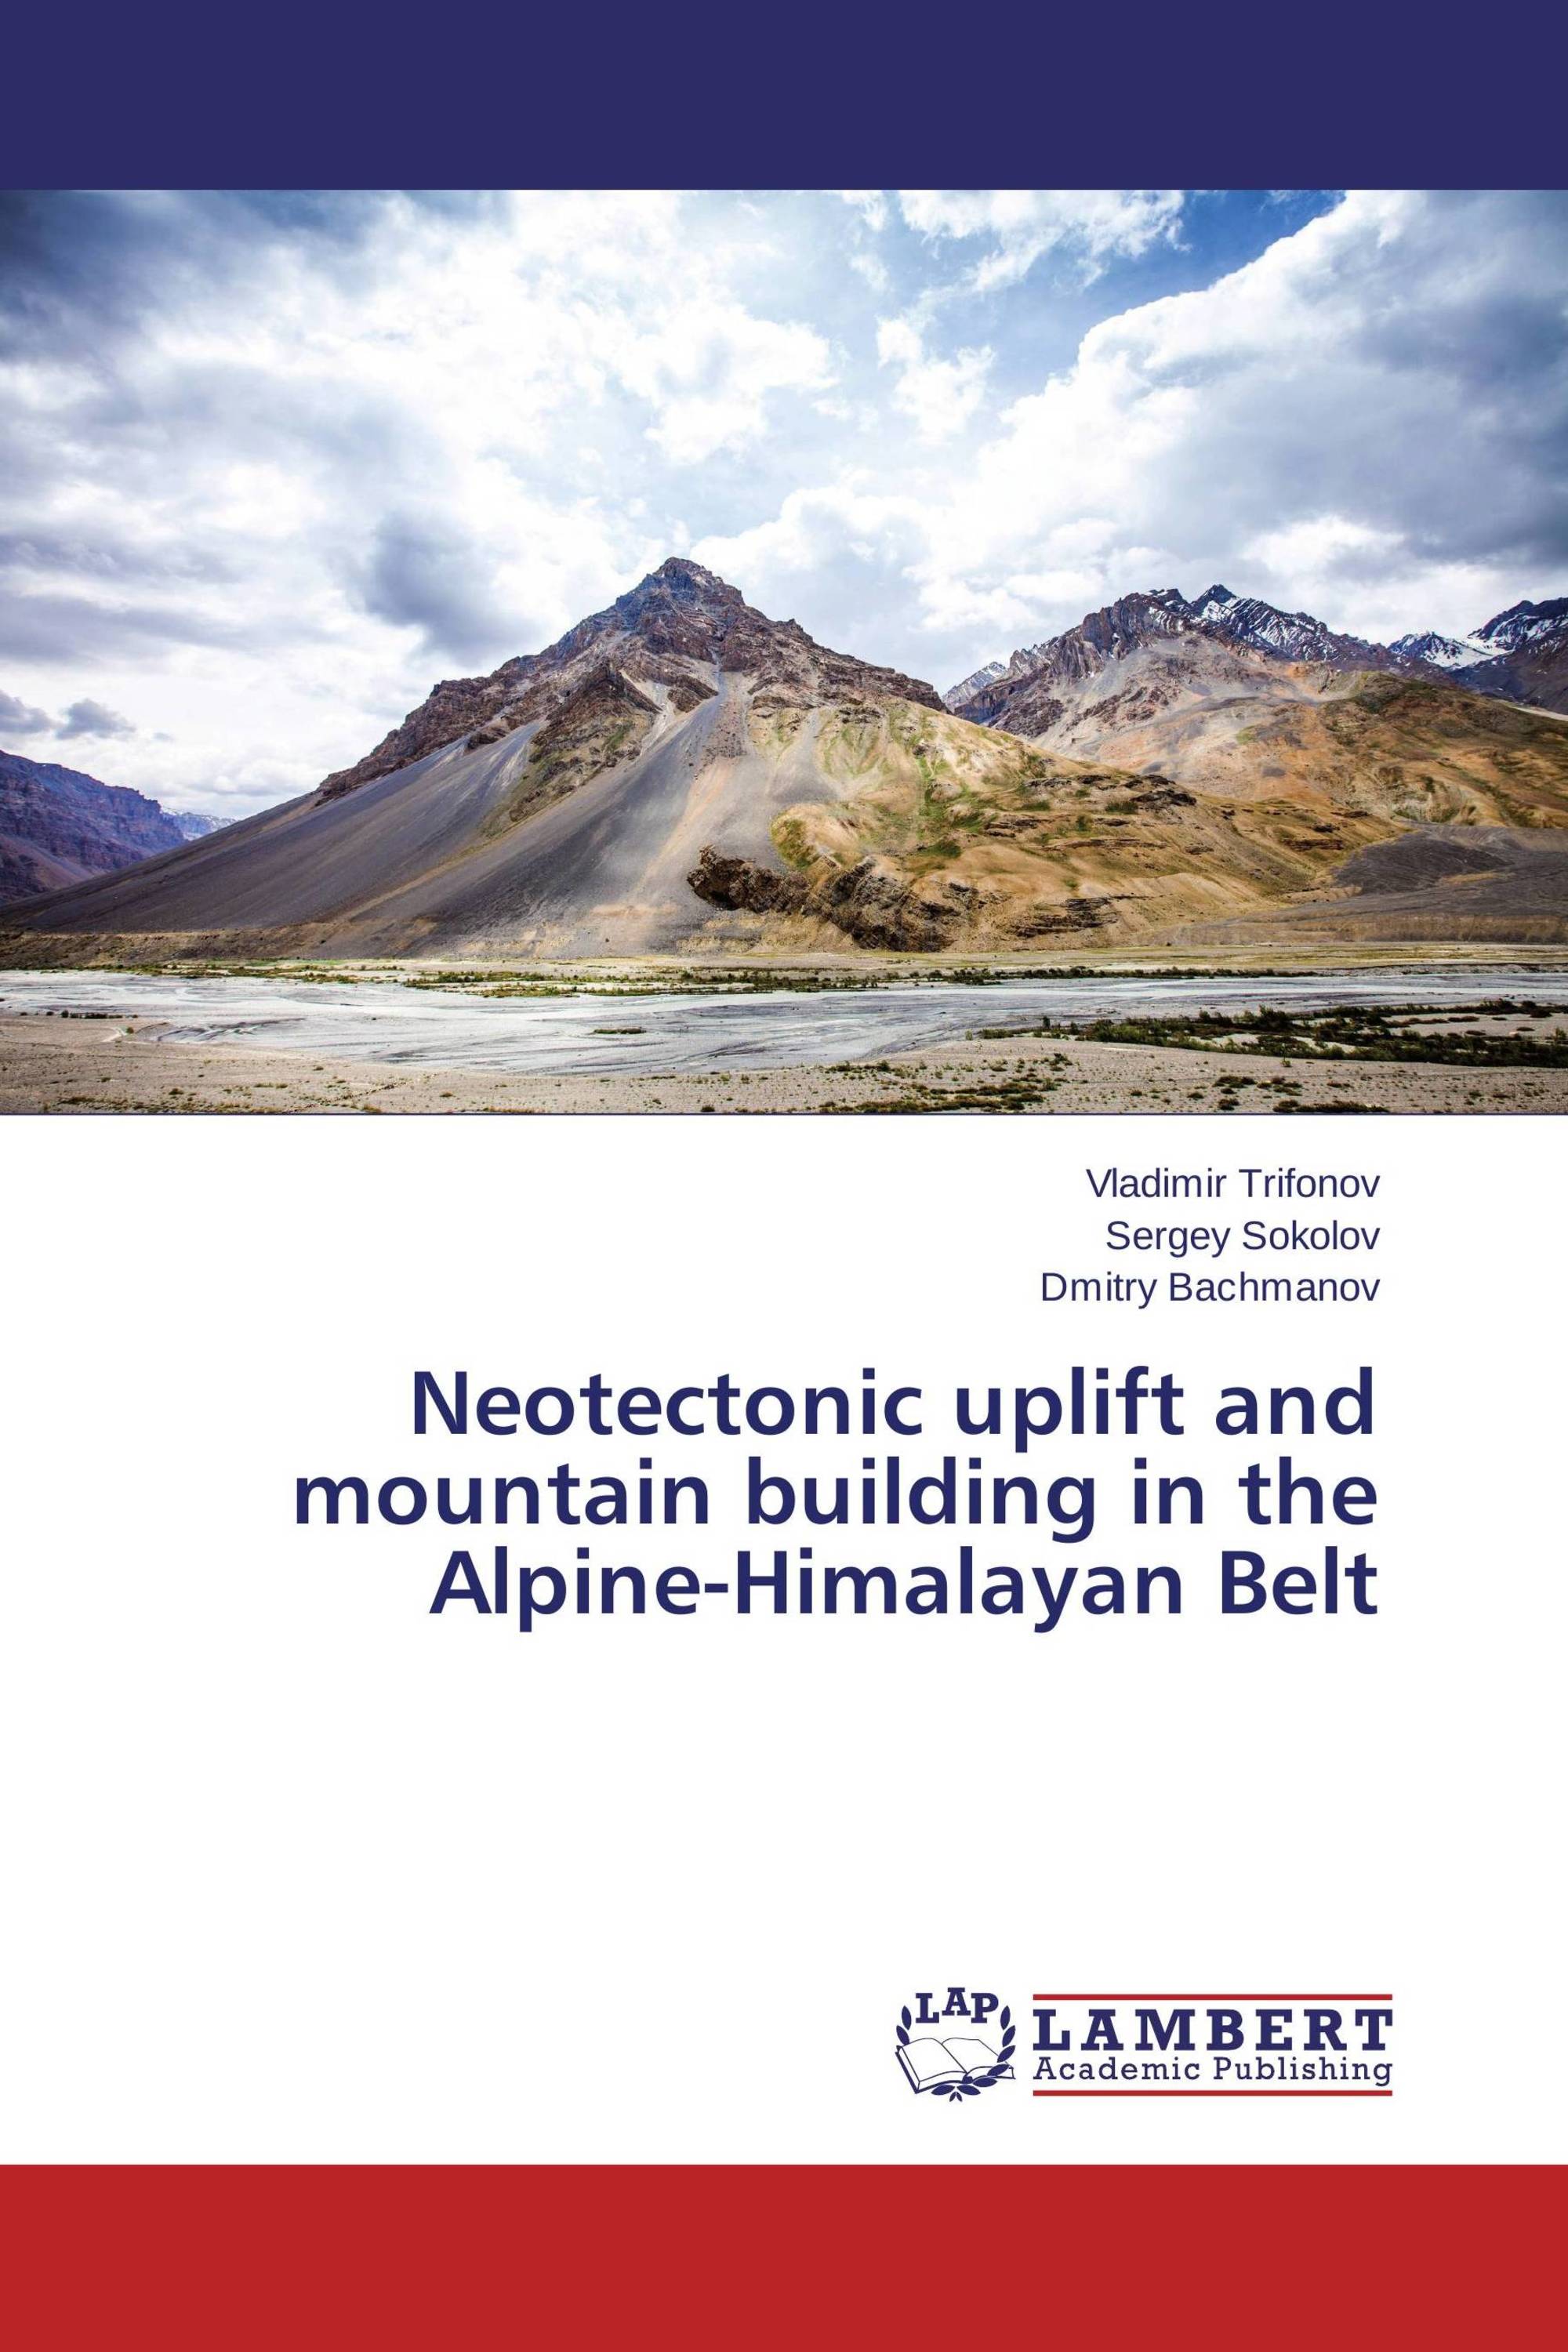 Neotectonic uplift and mountain building in the Alpine-Himalayan Belt